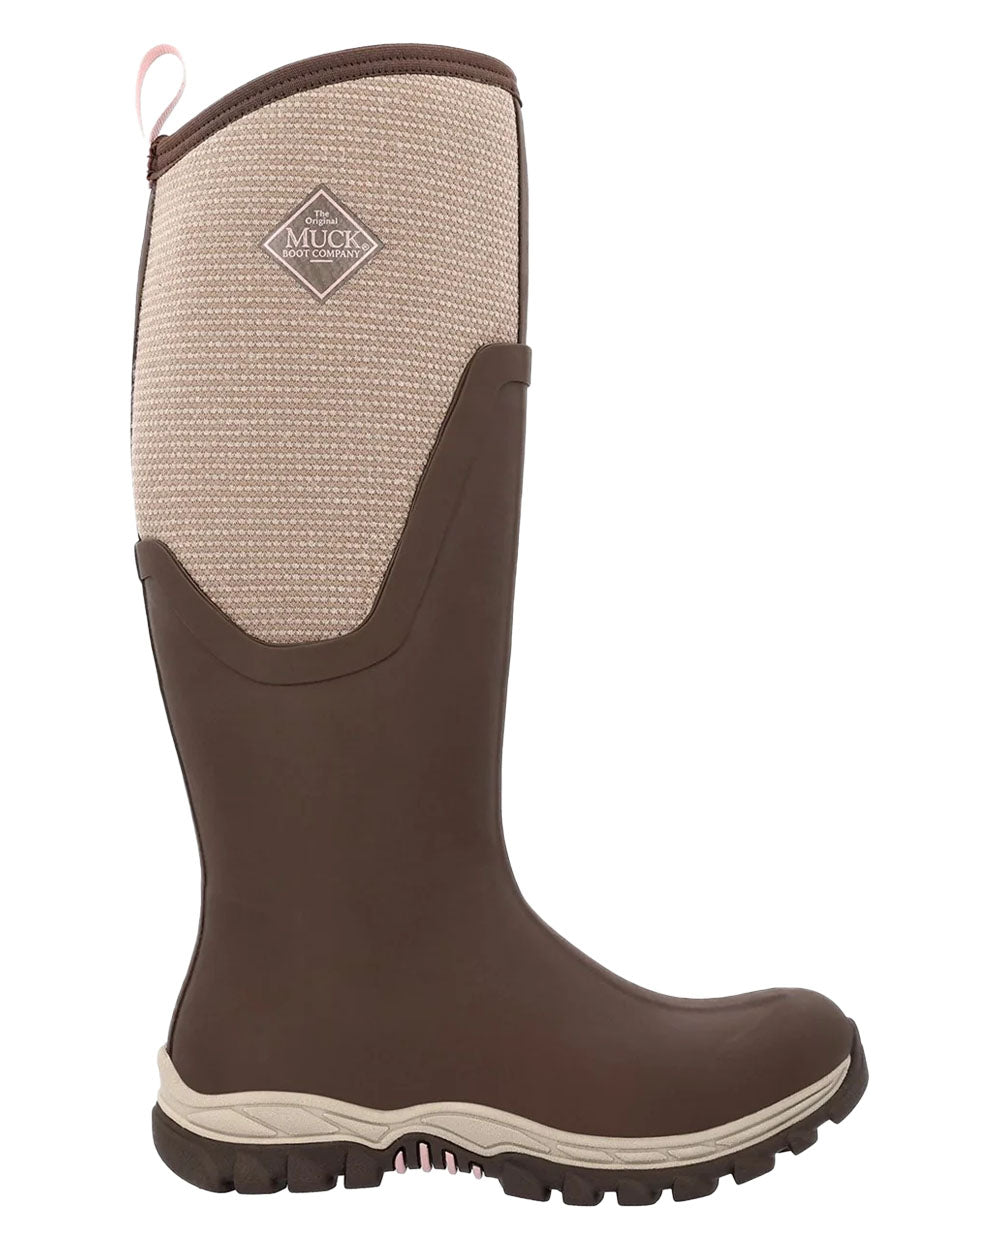 Chocolate Brown Walnut Woven Muck Boots Womens Artic Sport II Tall Wellingtons on White background 